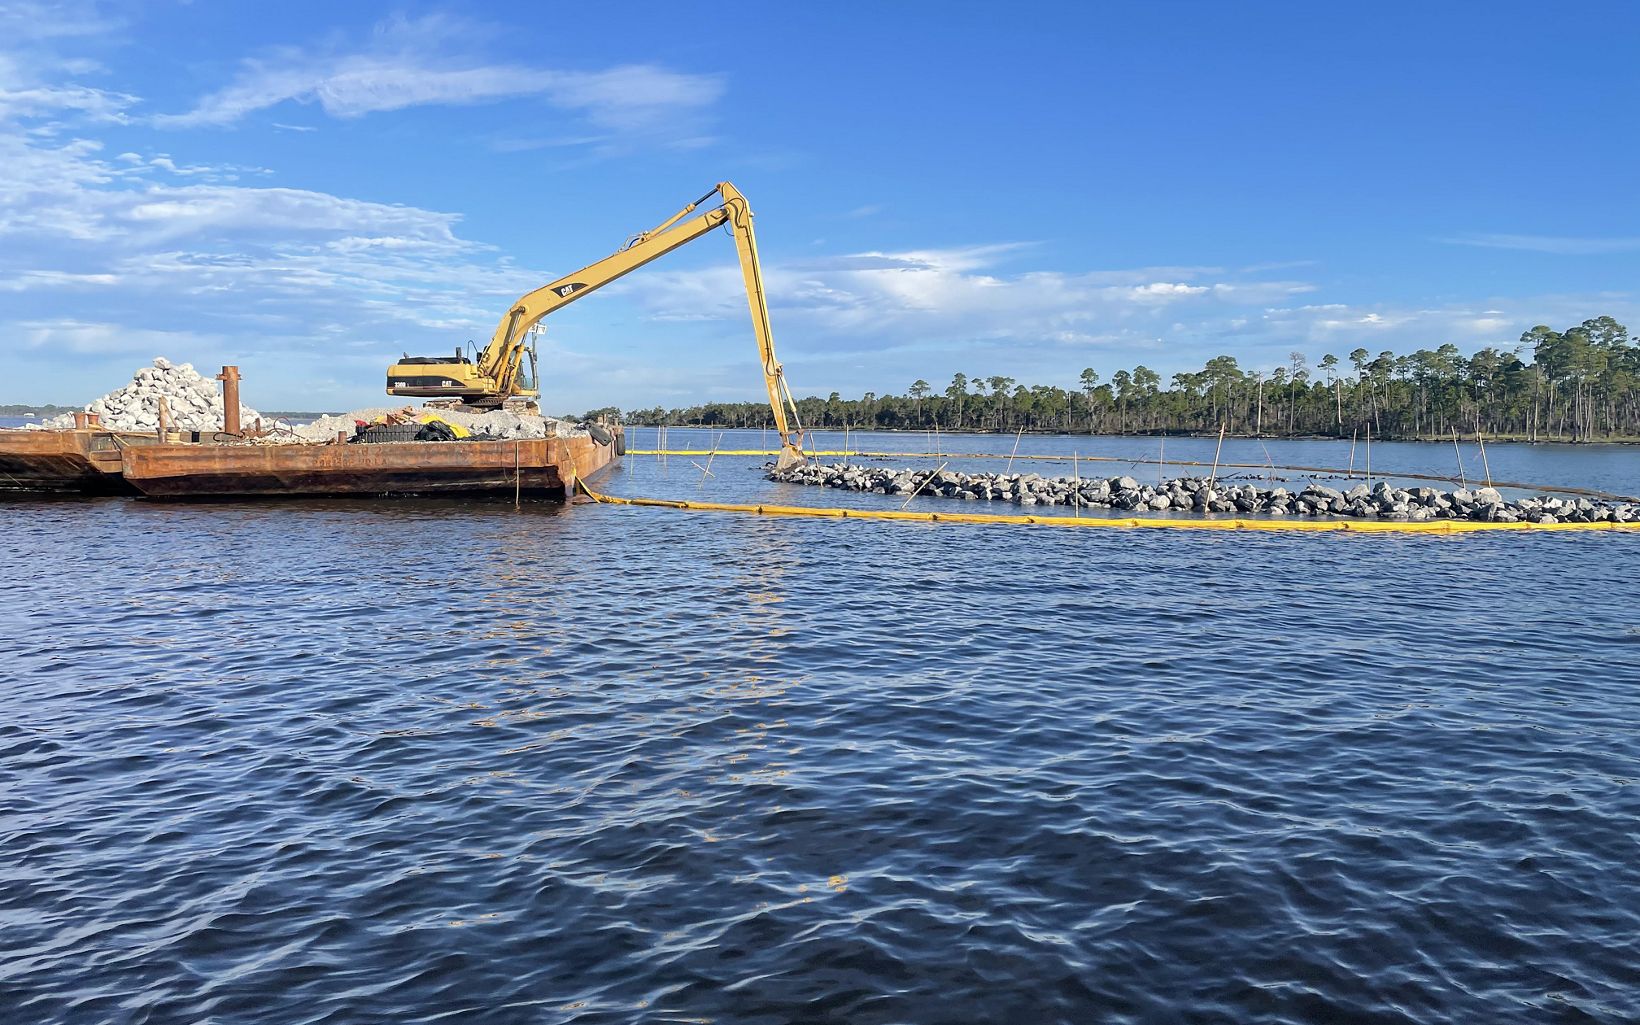 New Larger Reefs A backhoe on a barge is used to construct the reefs. © Jacobs Engineering